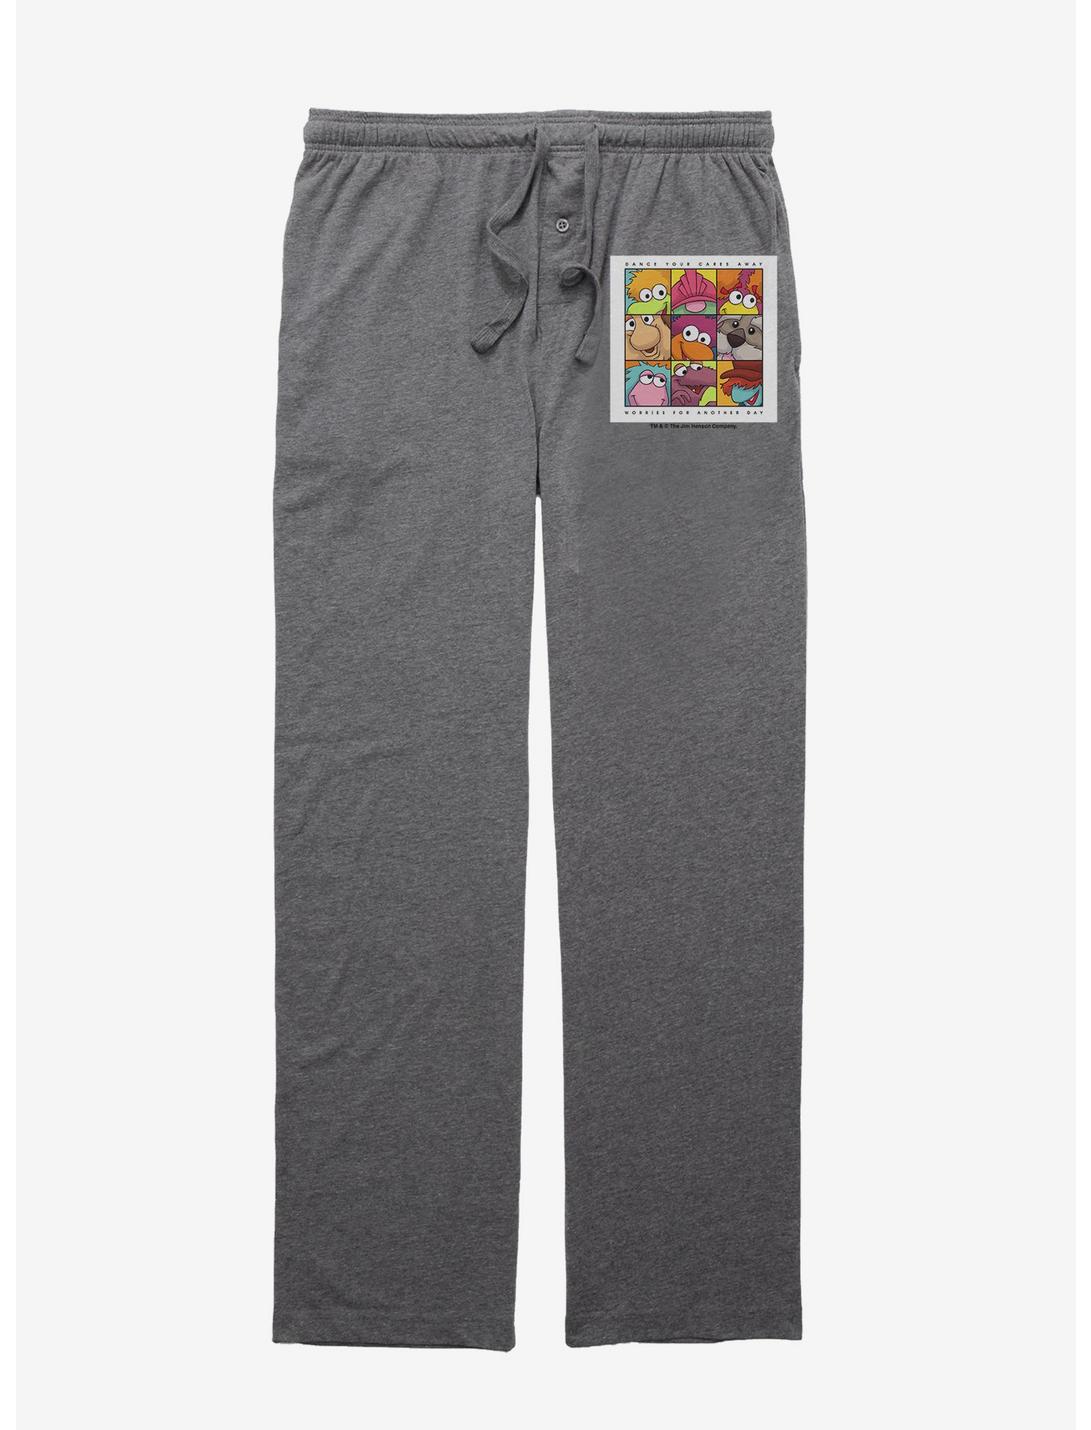 Jim Henson's Fraggle Rock Worries For Another Day Pajama Pants, GRAPHITE HEATHER, hi-res